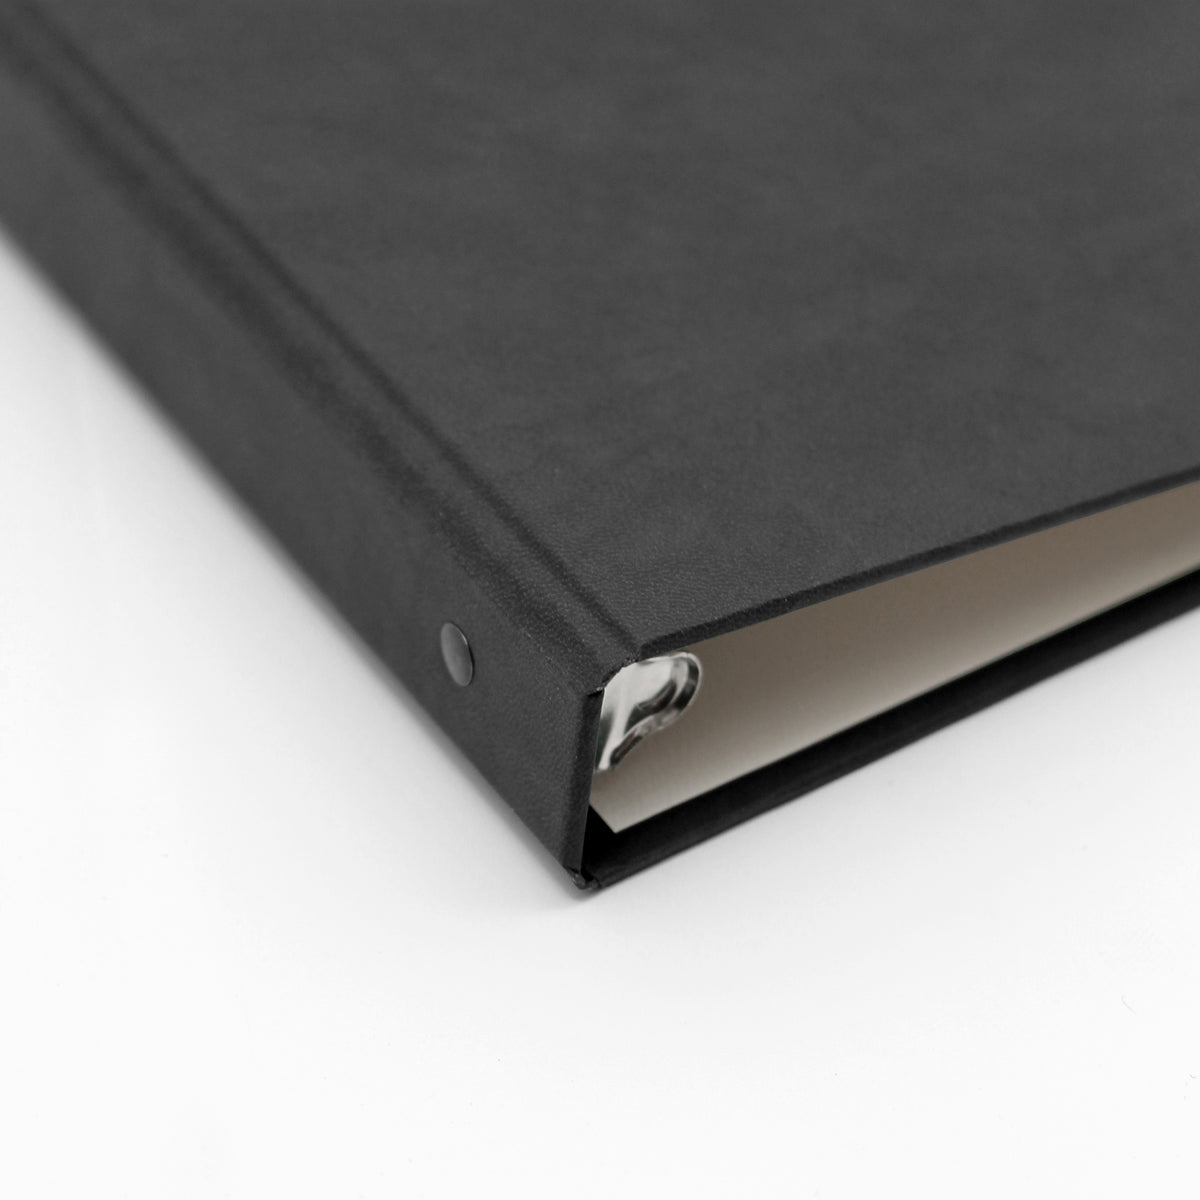 Storage Binder for Photos or Documents with Black Vegan Leather Cover